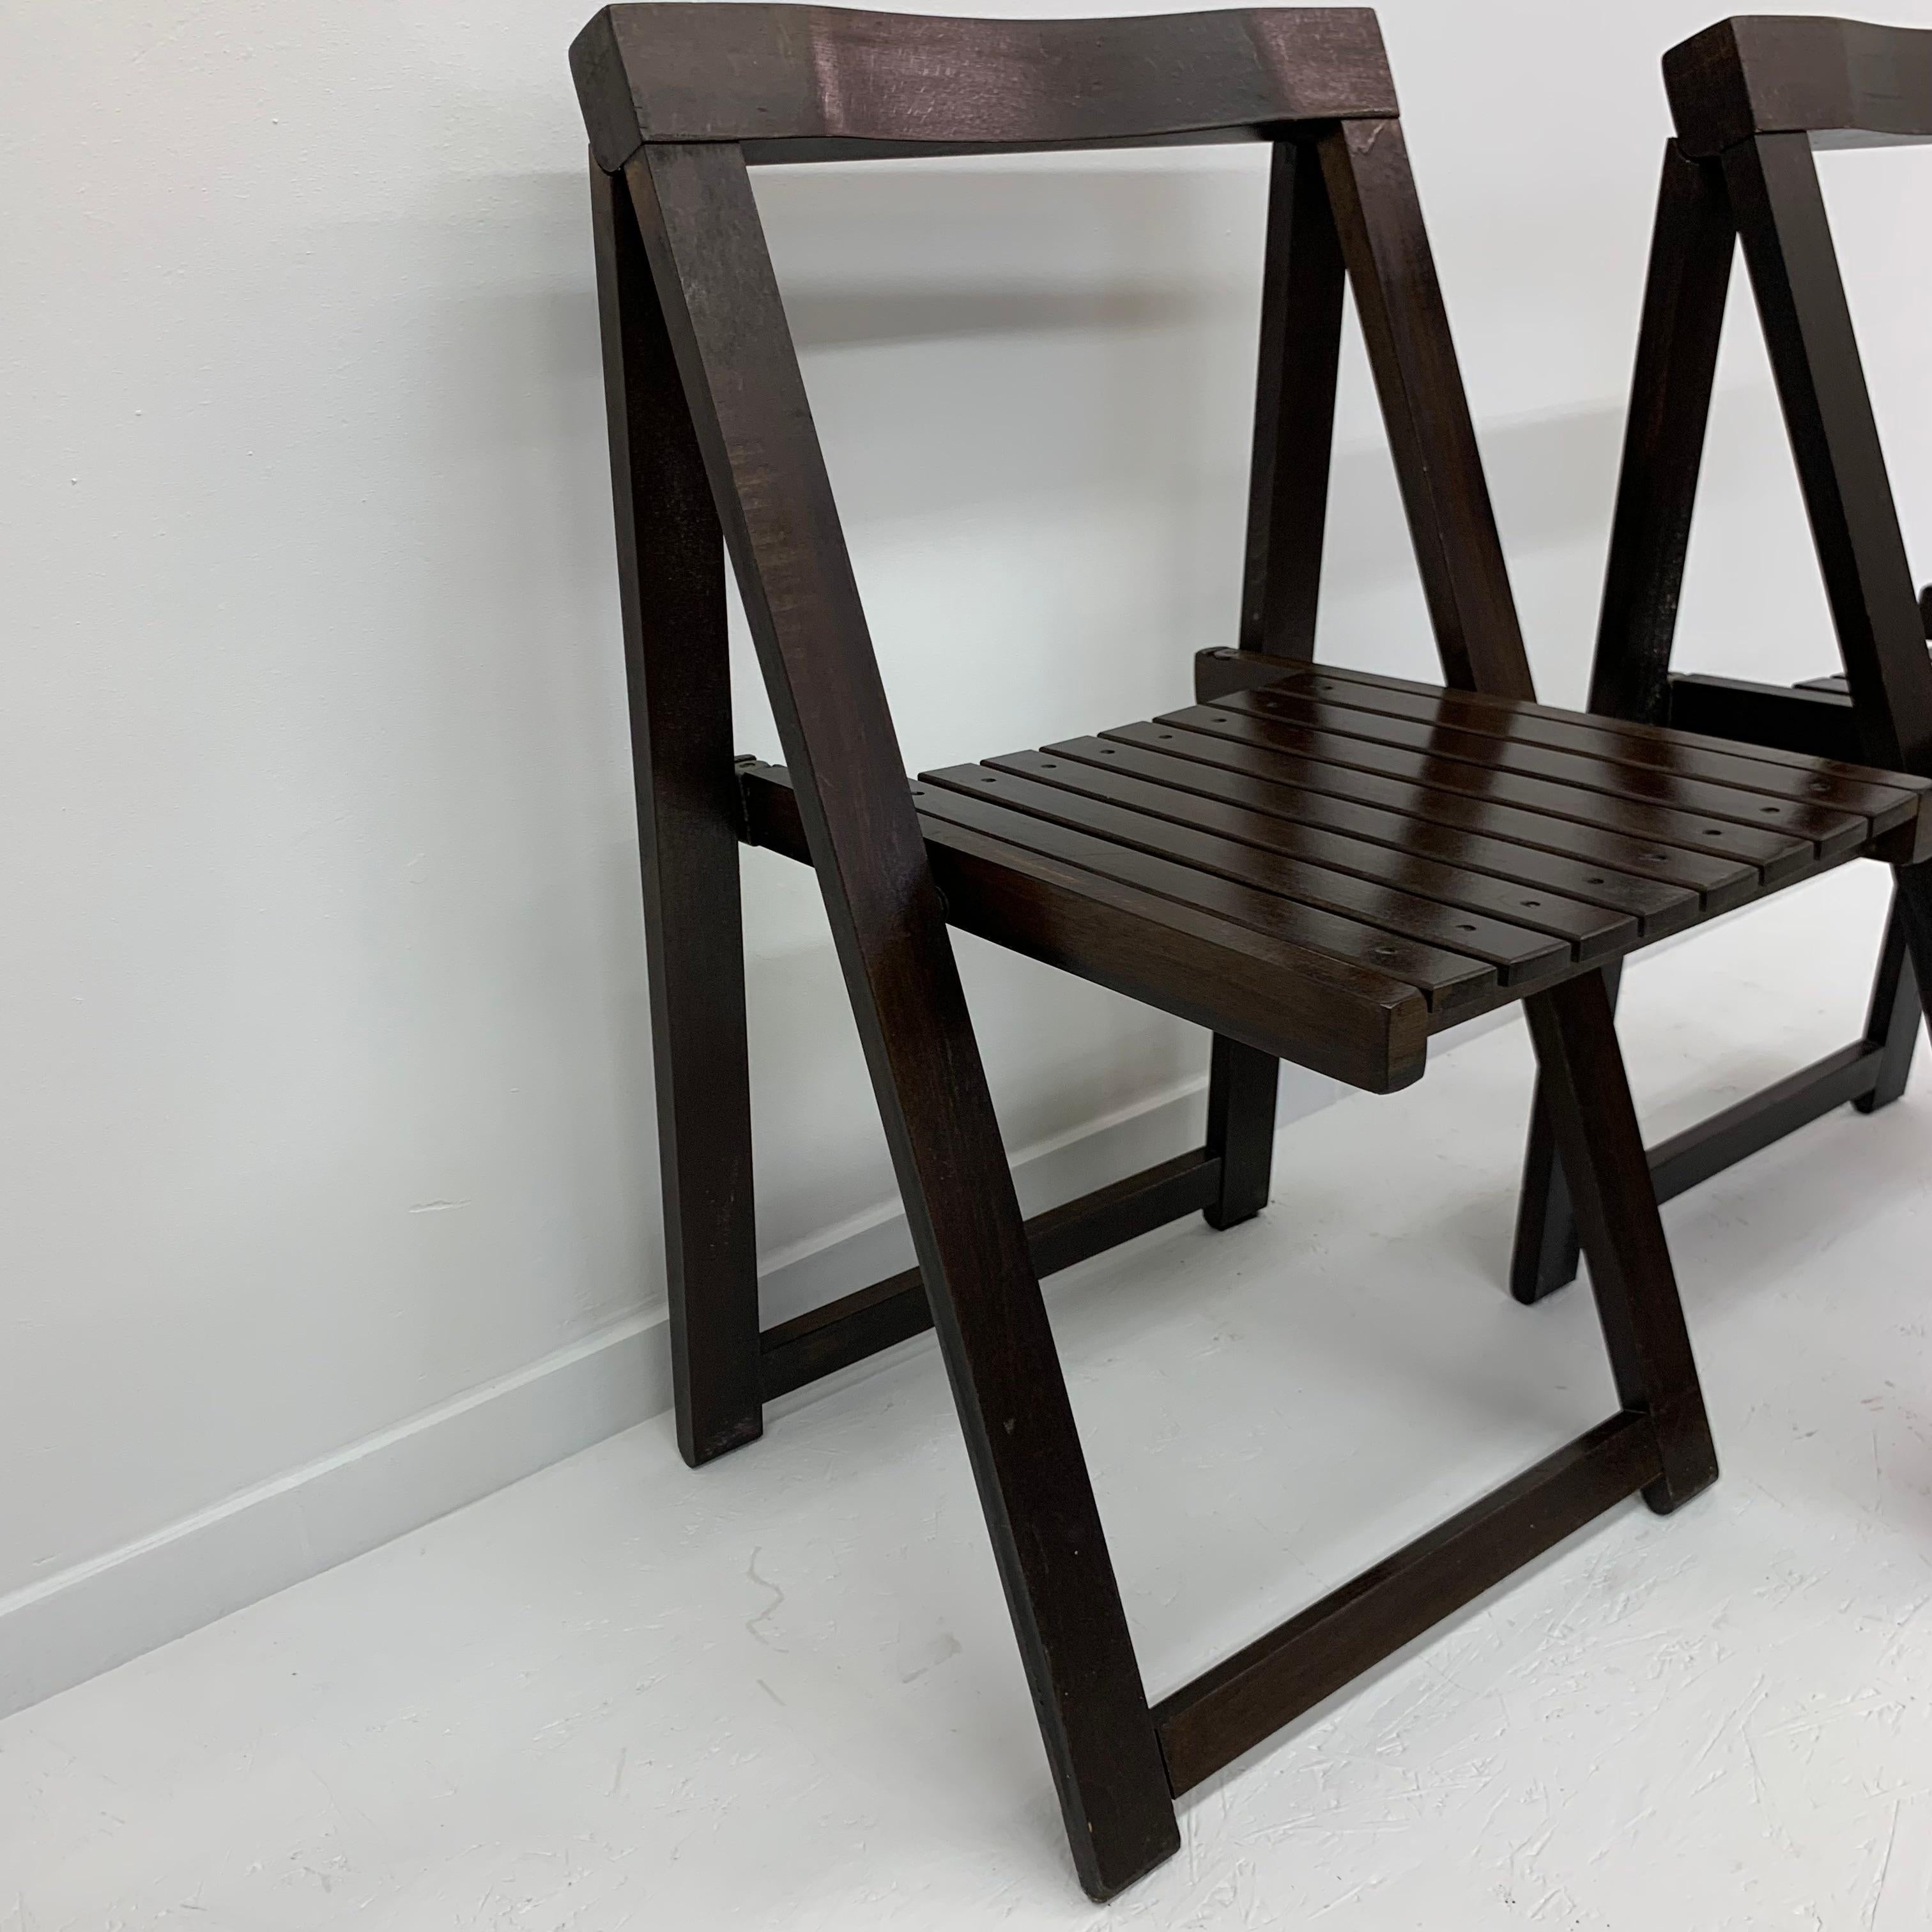 Set of 2 Aldo Jacober for Alberto Bazzani wooden folding chairs, 1960’s For Sale 6